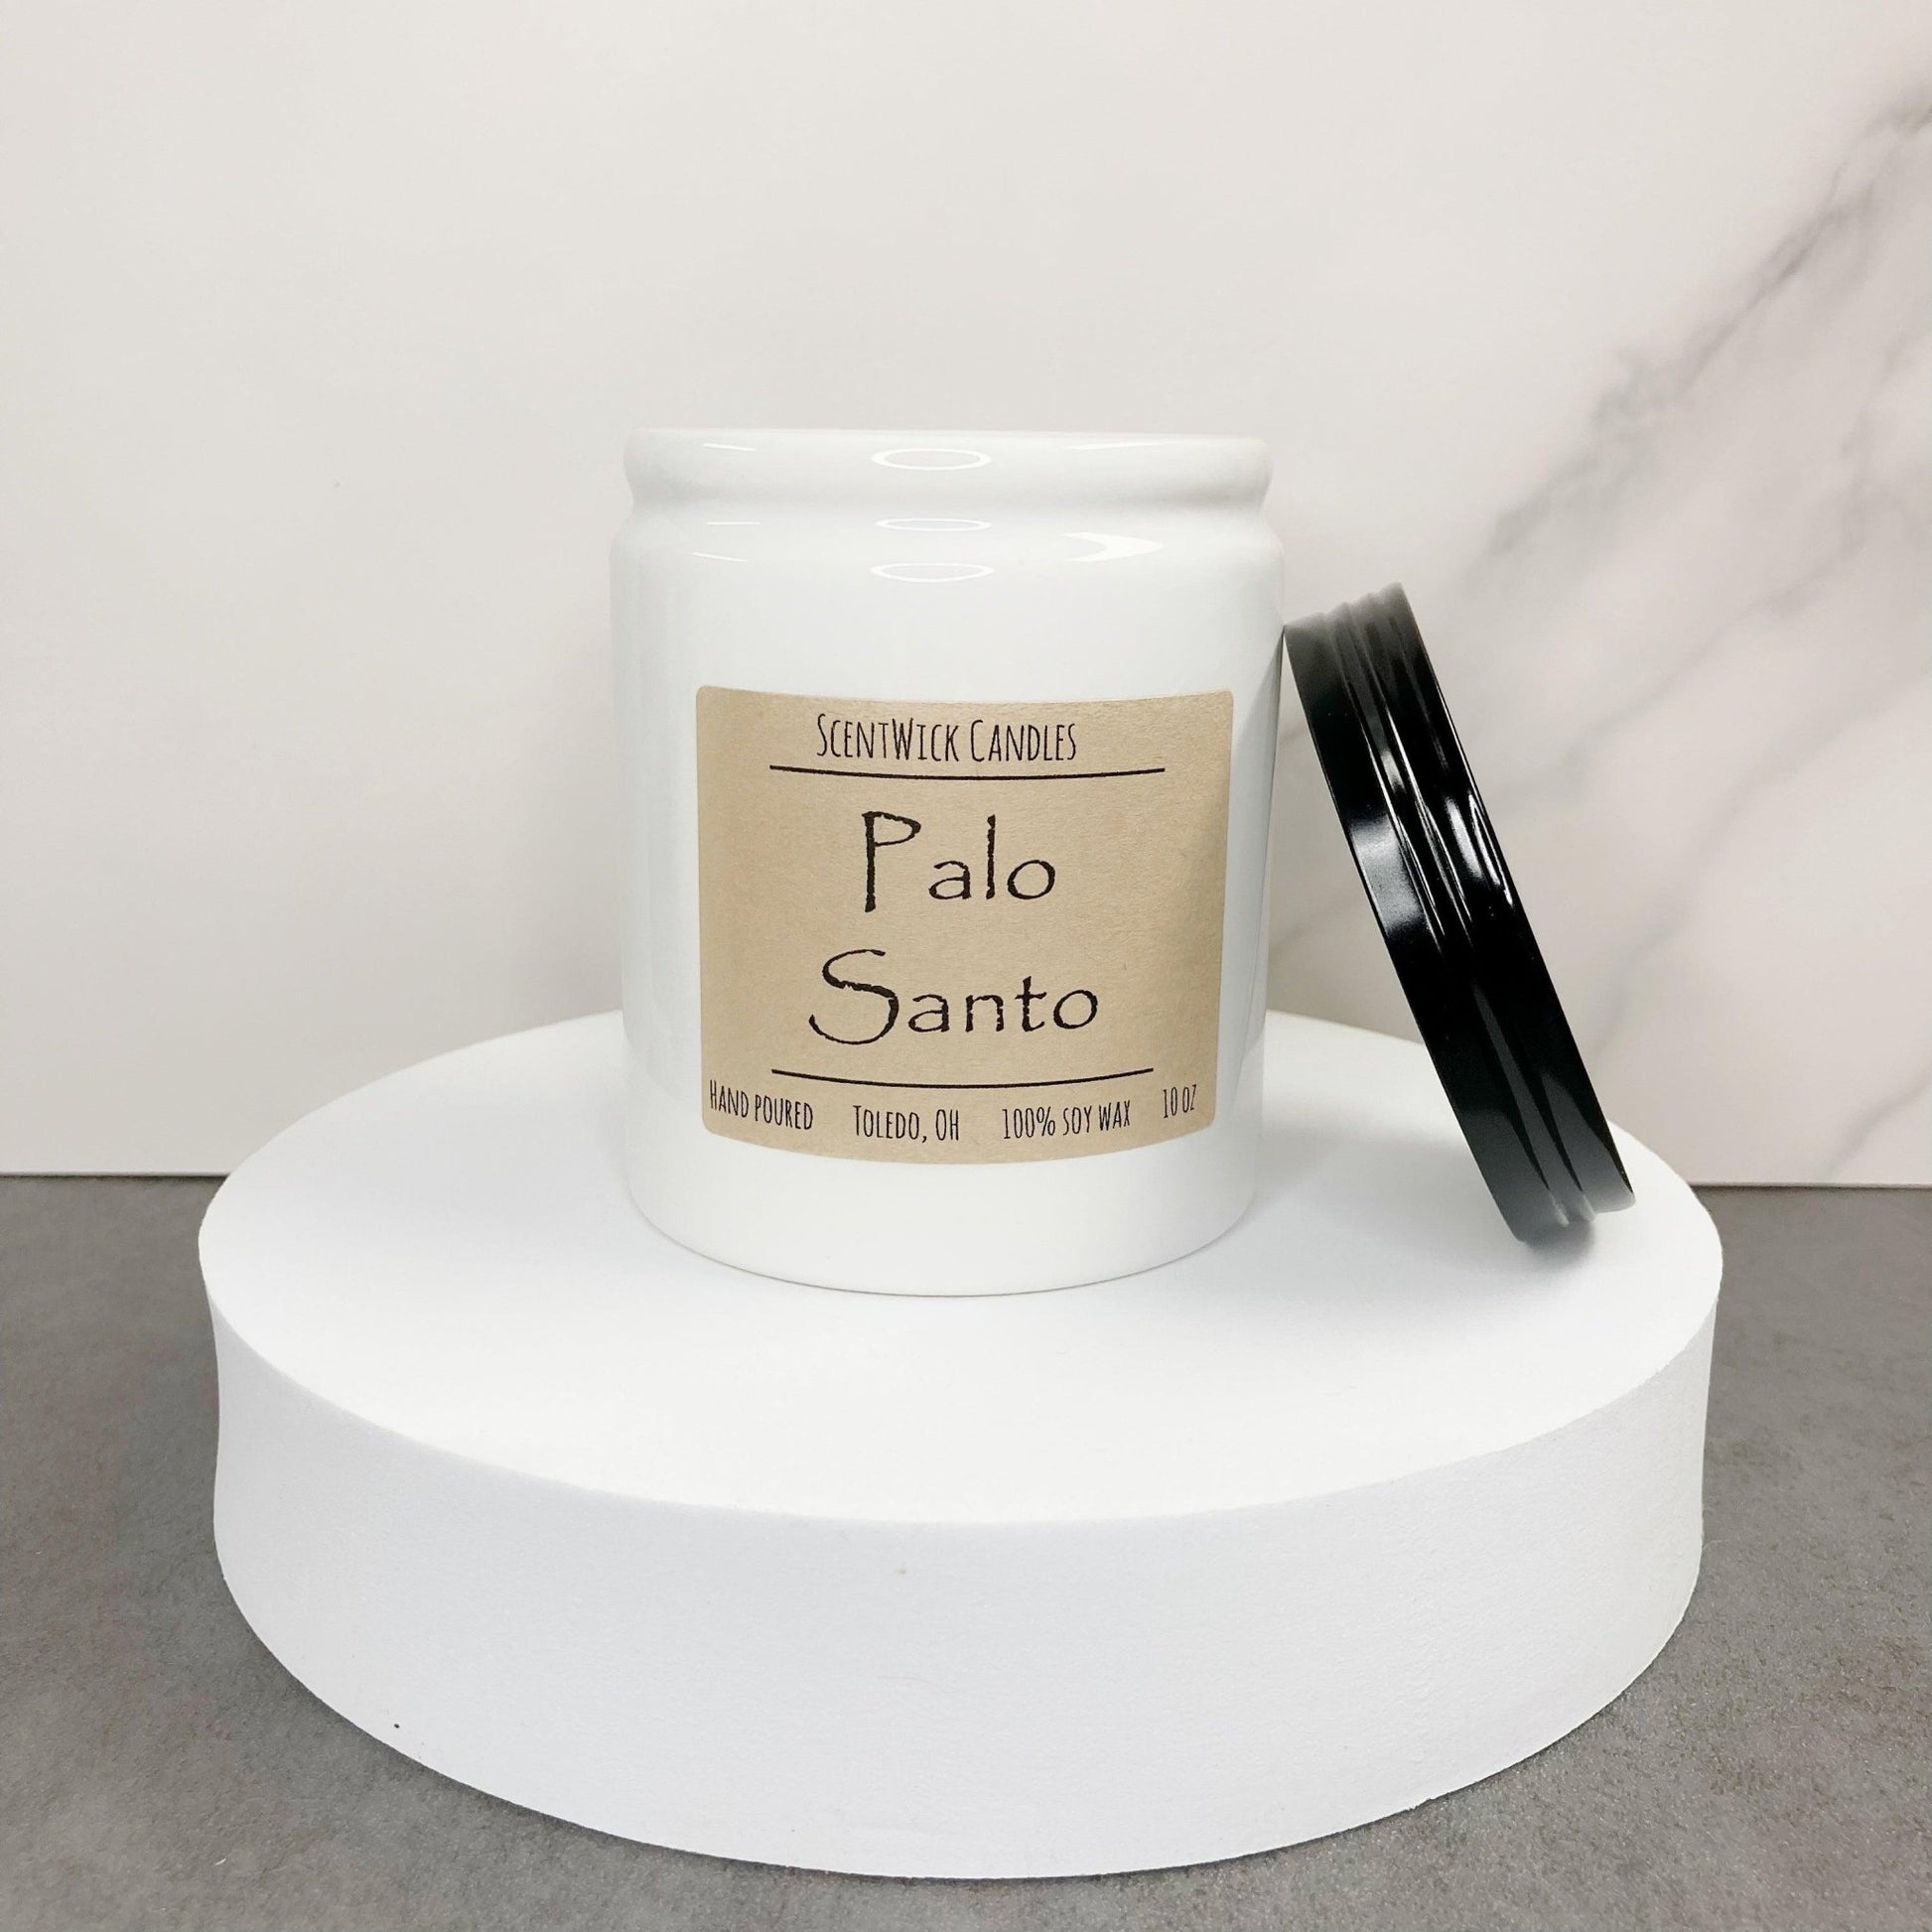 Palo Santo Candle | The Farmhouse Collection - ScentWick Candles